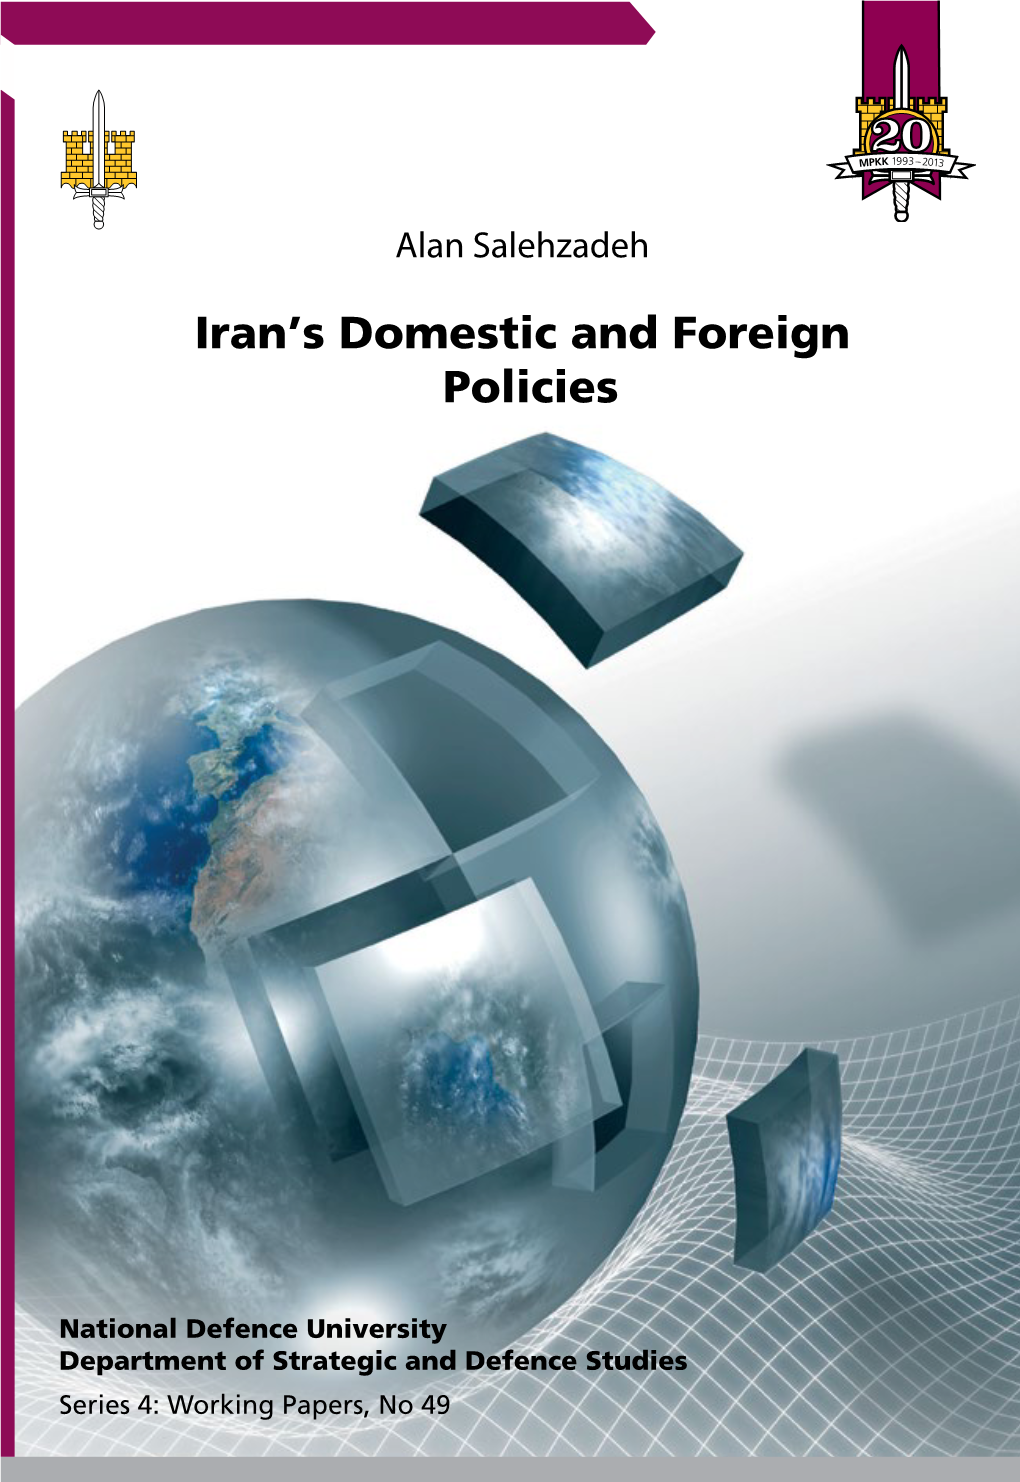 Iran's Domestic and Foreign Policies